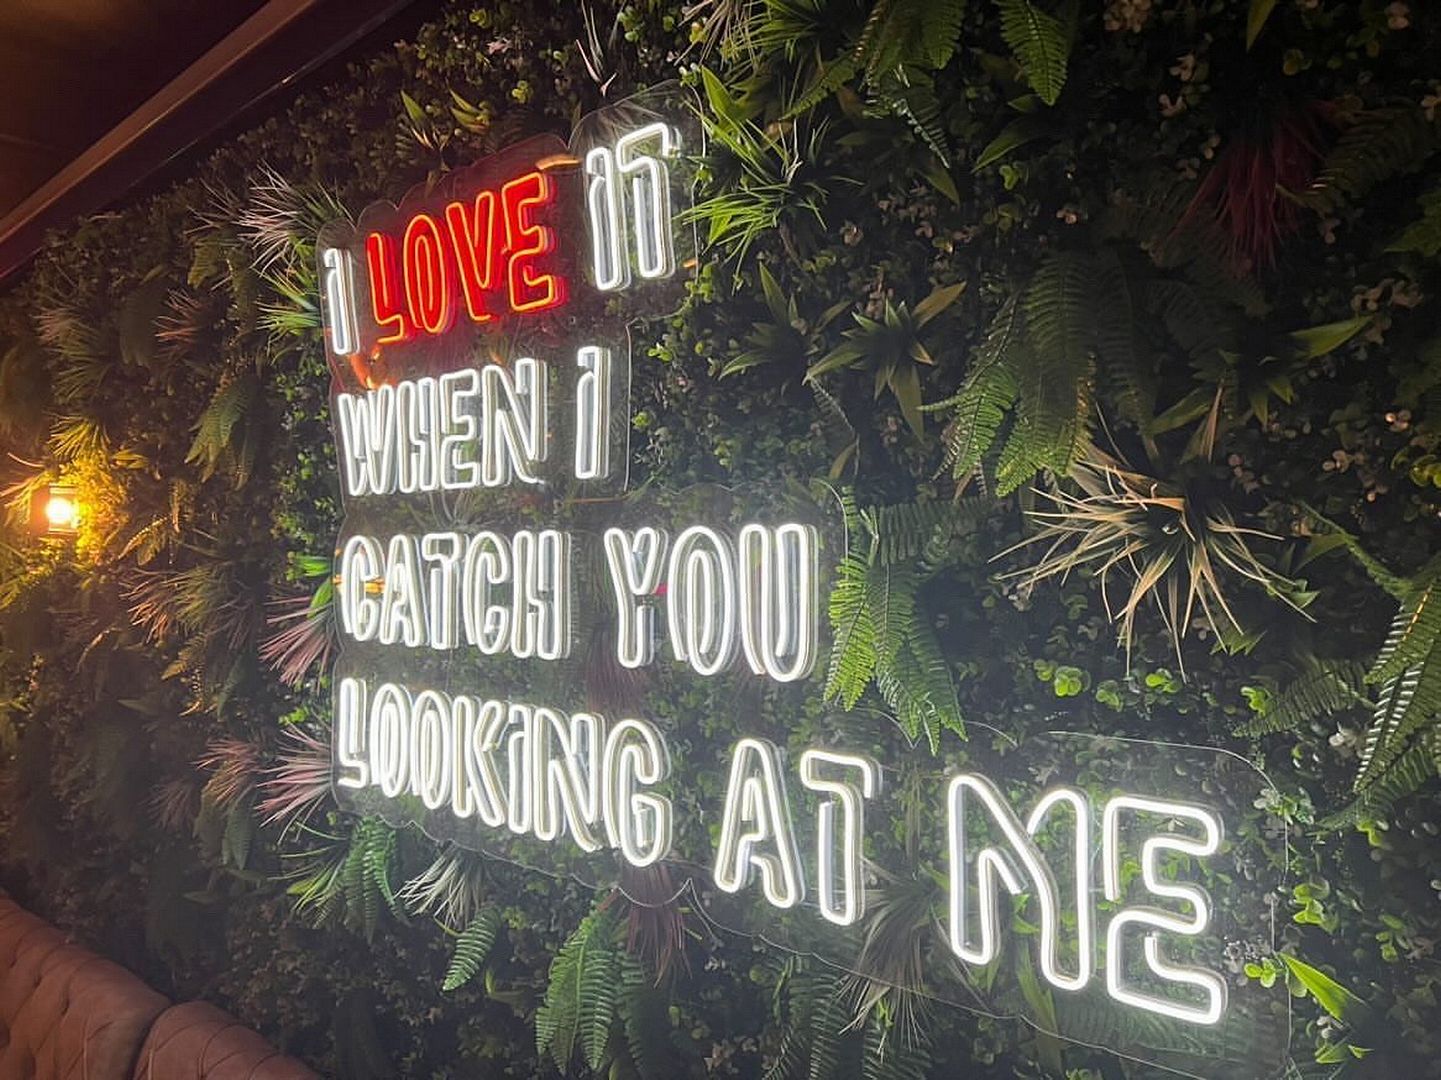 I Love it When i Catch You Looking At Me Neon Sign